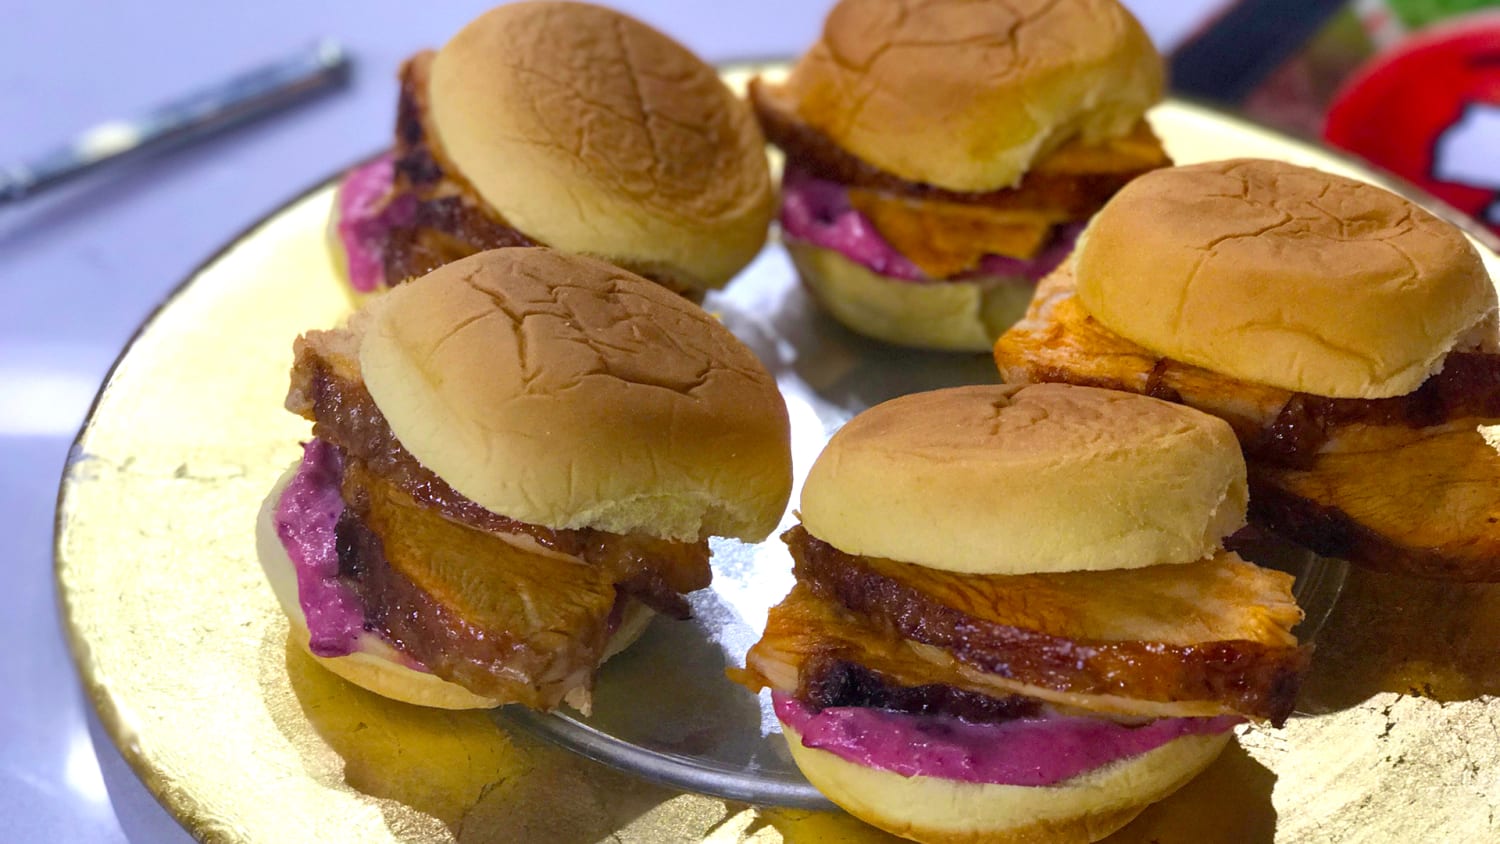 Peaky Sliders  The popular game day food from the US is very different  from the endless burger options everyone knows. It rules out the fear of  making a bad choice by